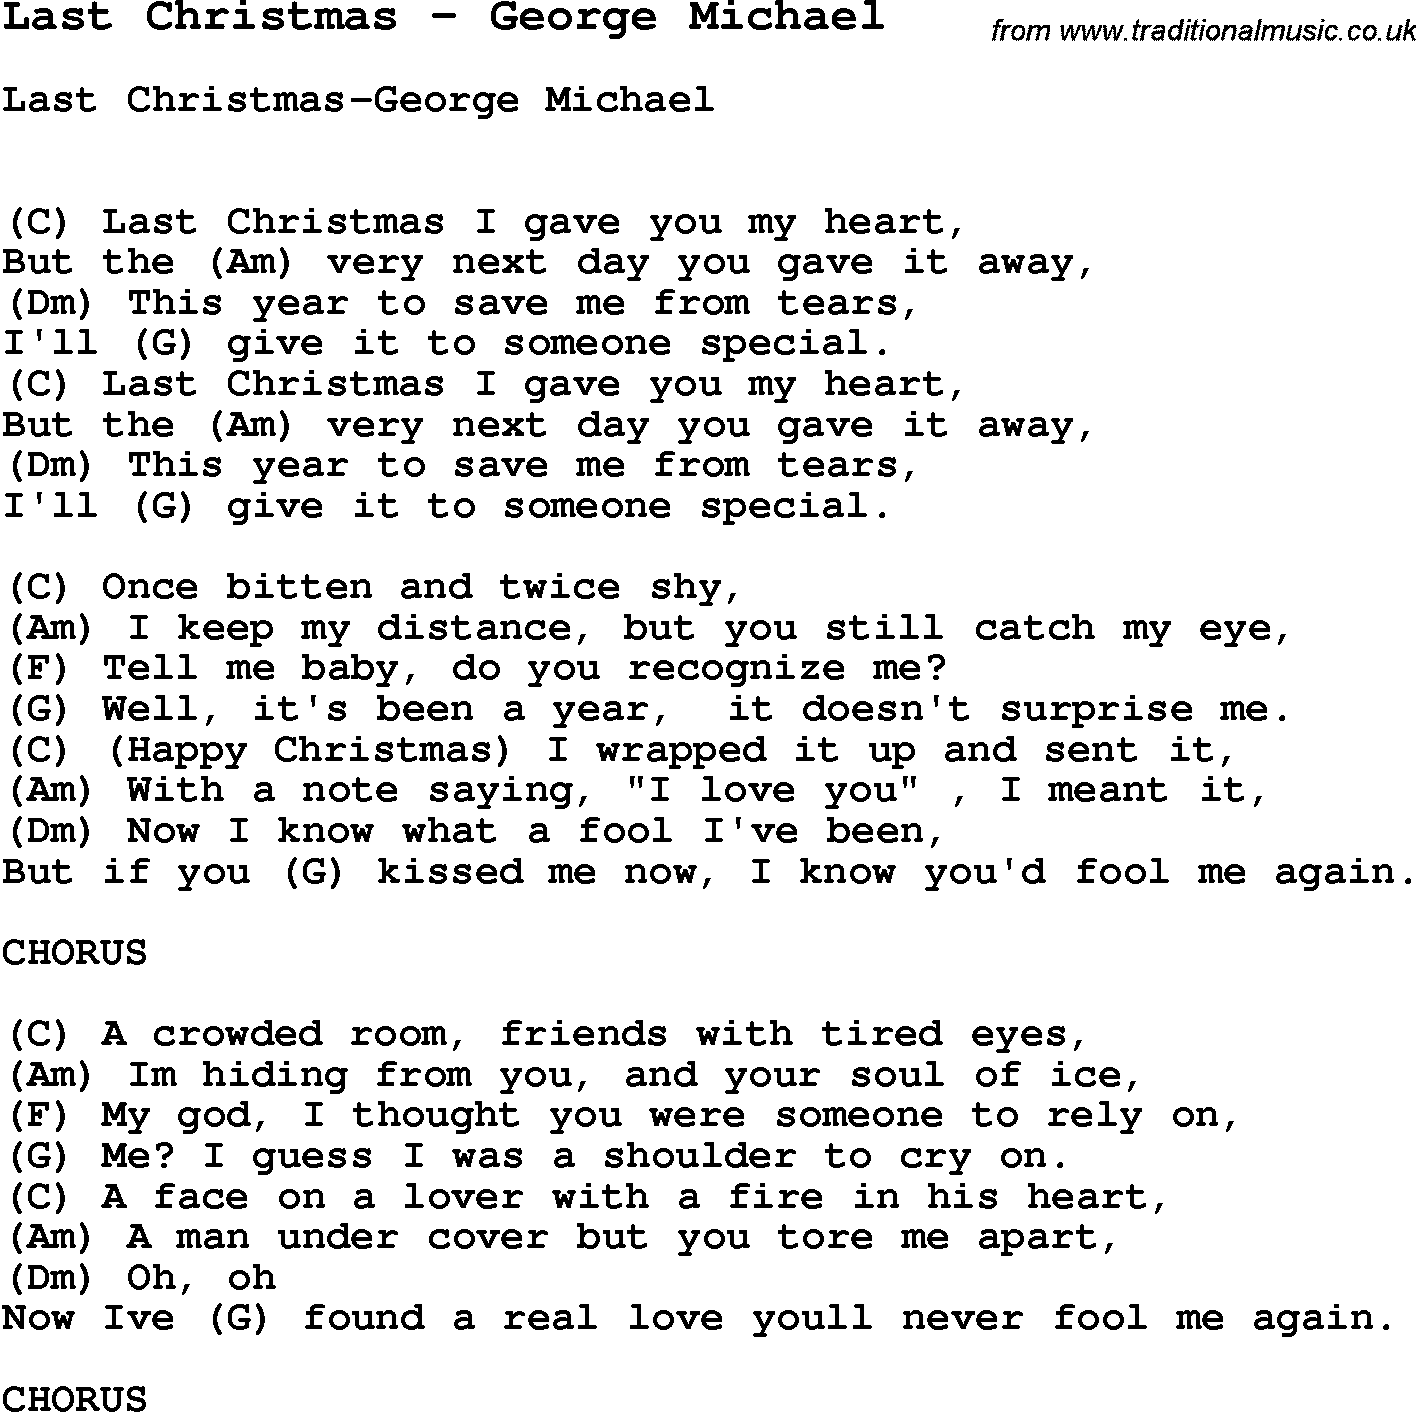 Song Last Christmas by George Michael, with lyrics for vocal performance and accompaniment chords for Ukulele, Guitar Banjo etc.